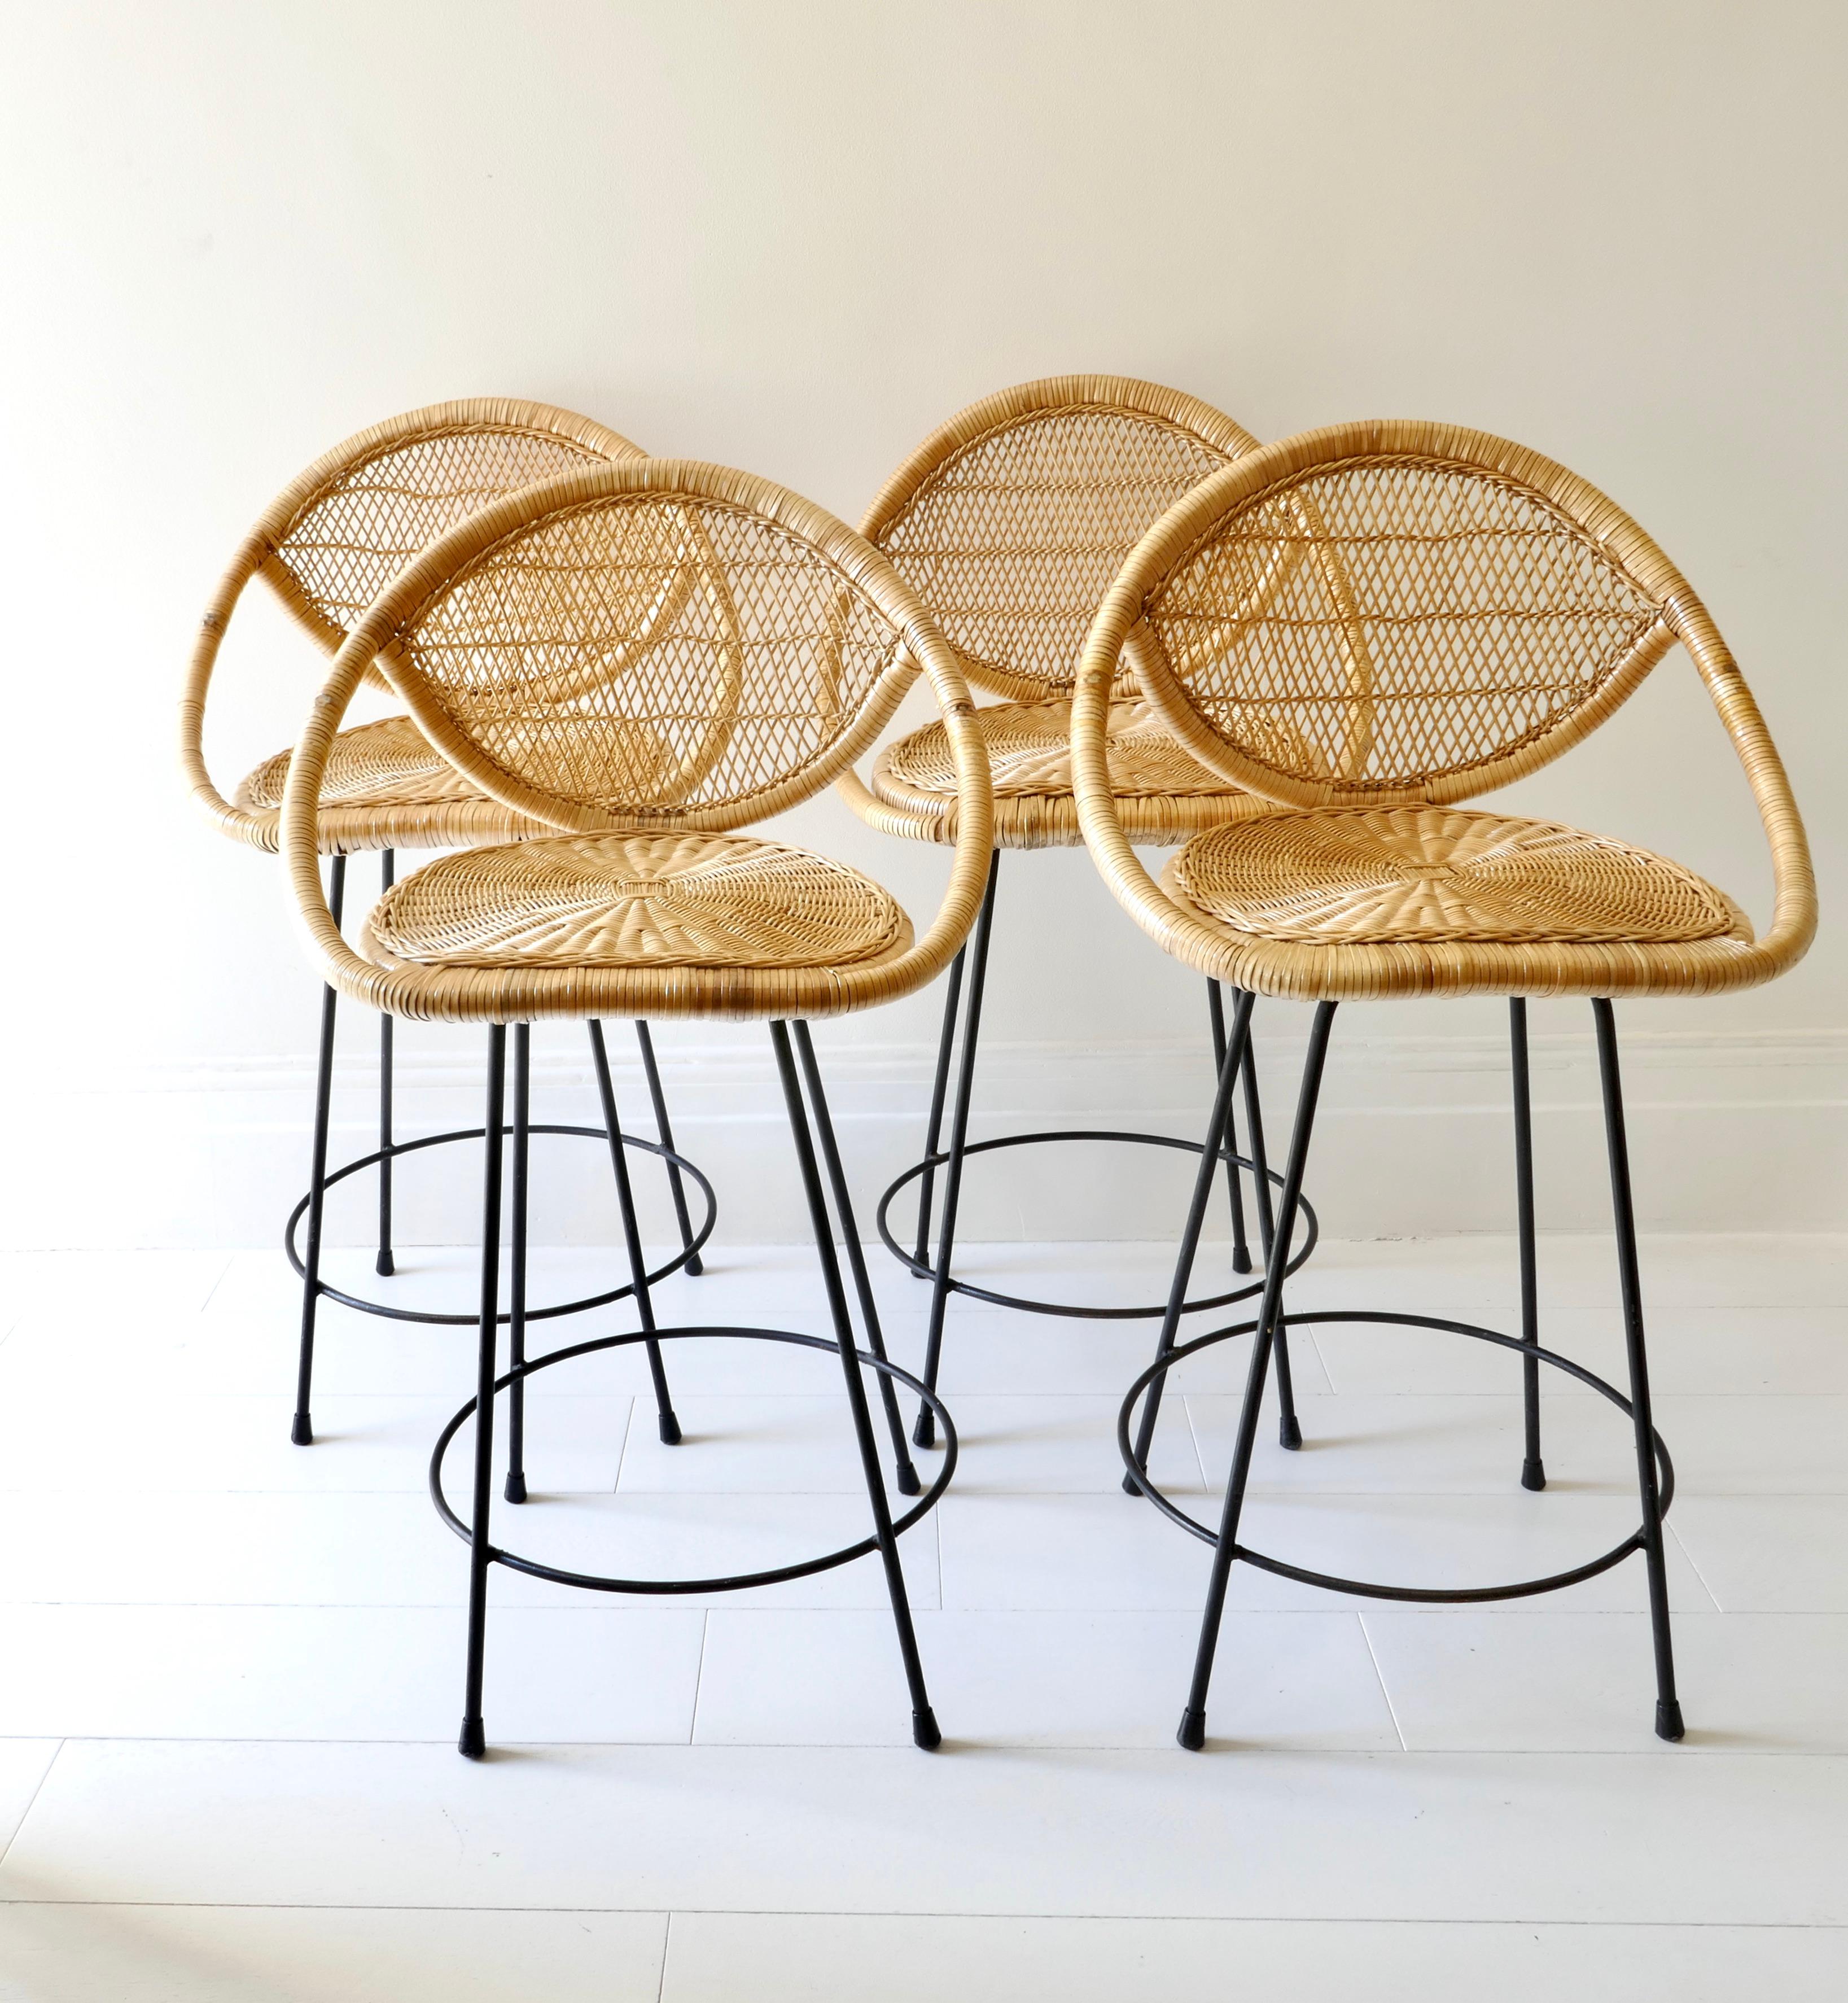 Rattan bar stools with black legs, France, 1970s
Can be used indoors and outdoors.